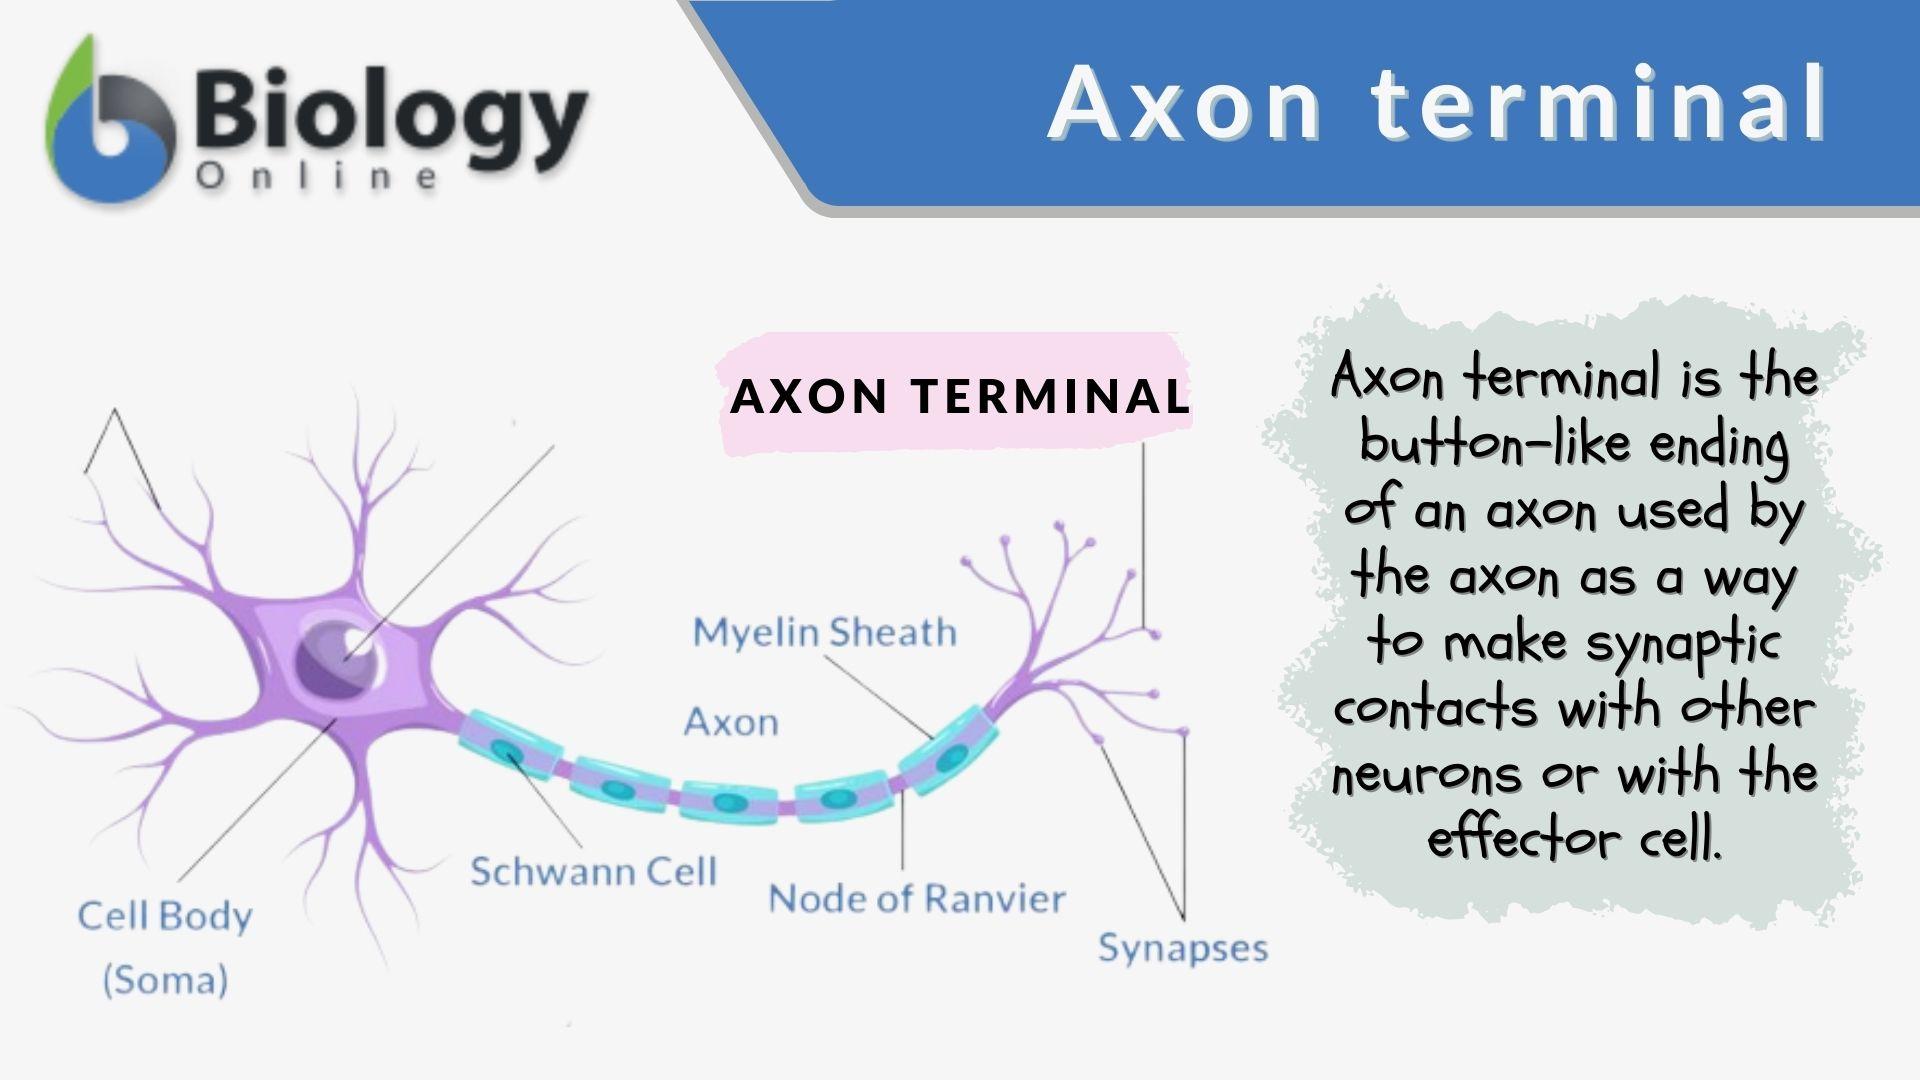 Axon hillock Definition and Examples - Biology Online Dictionary